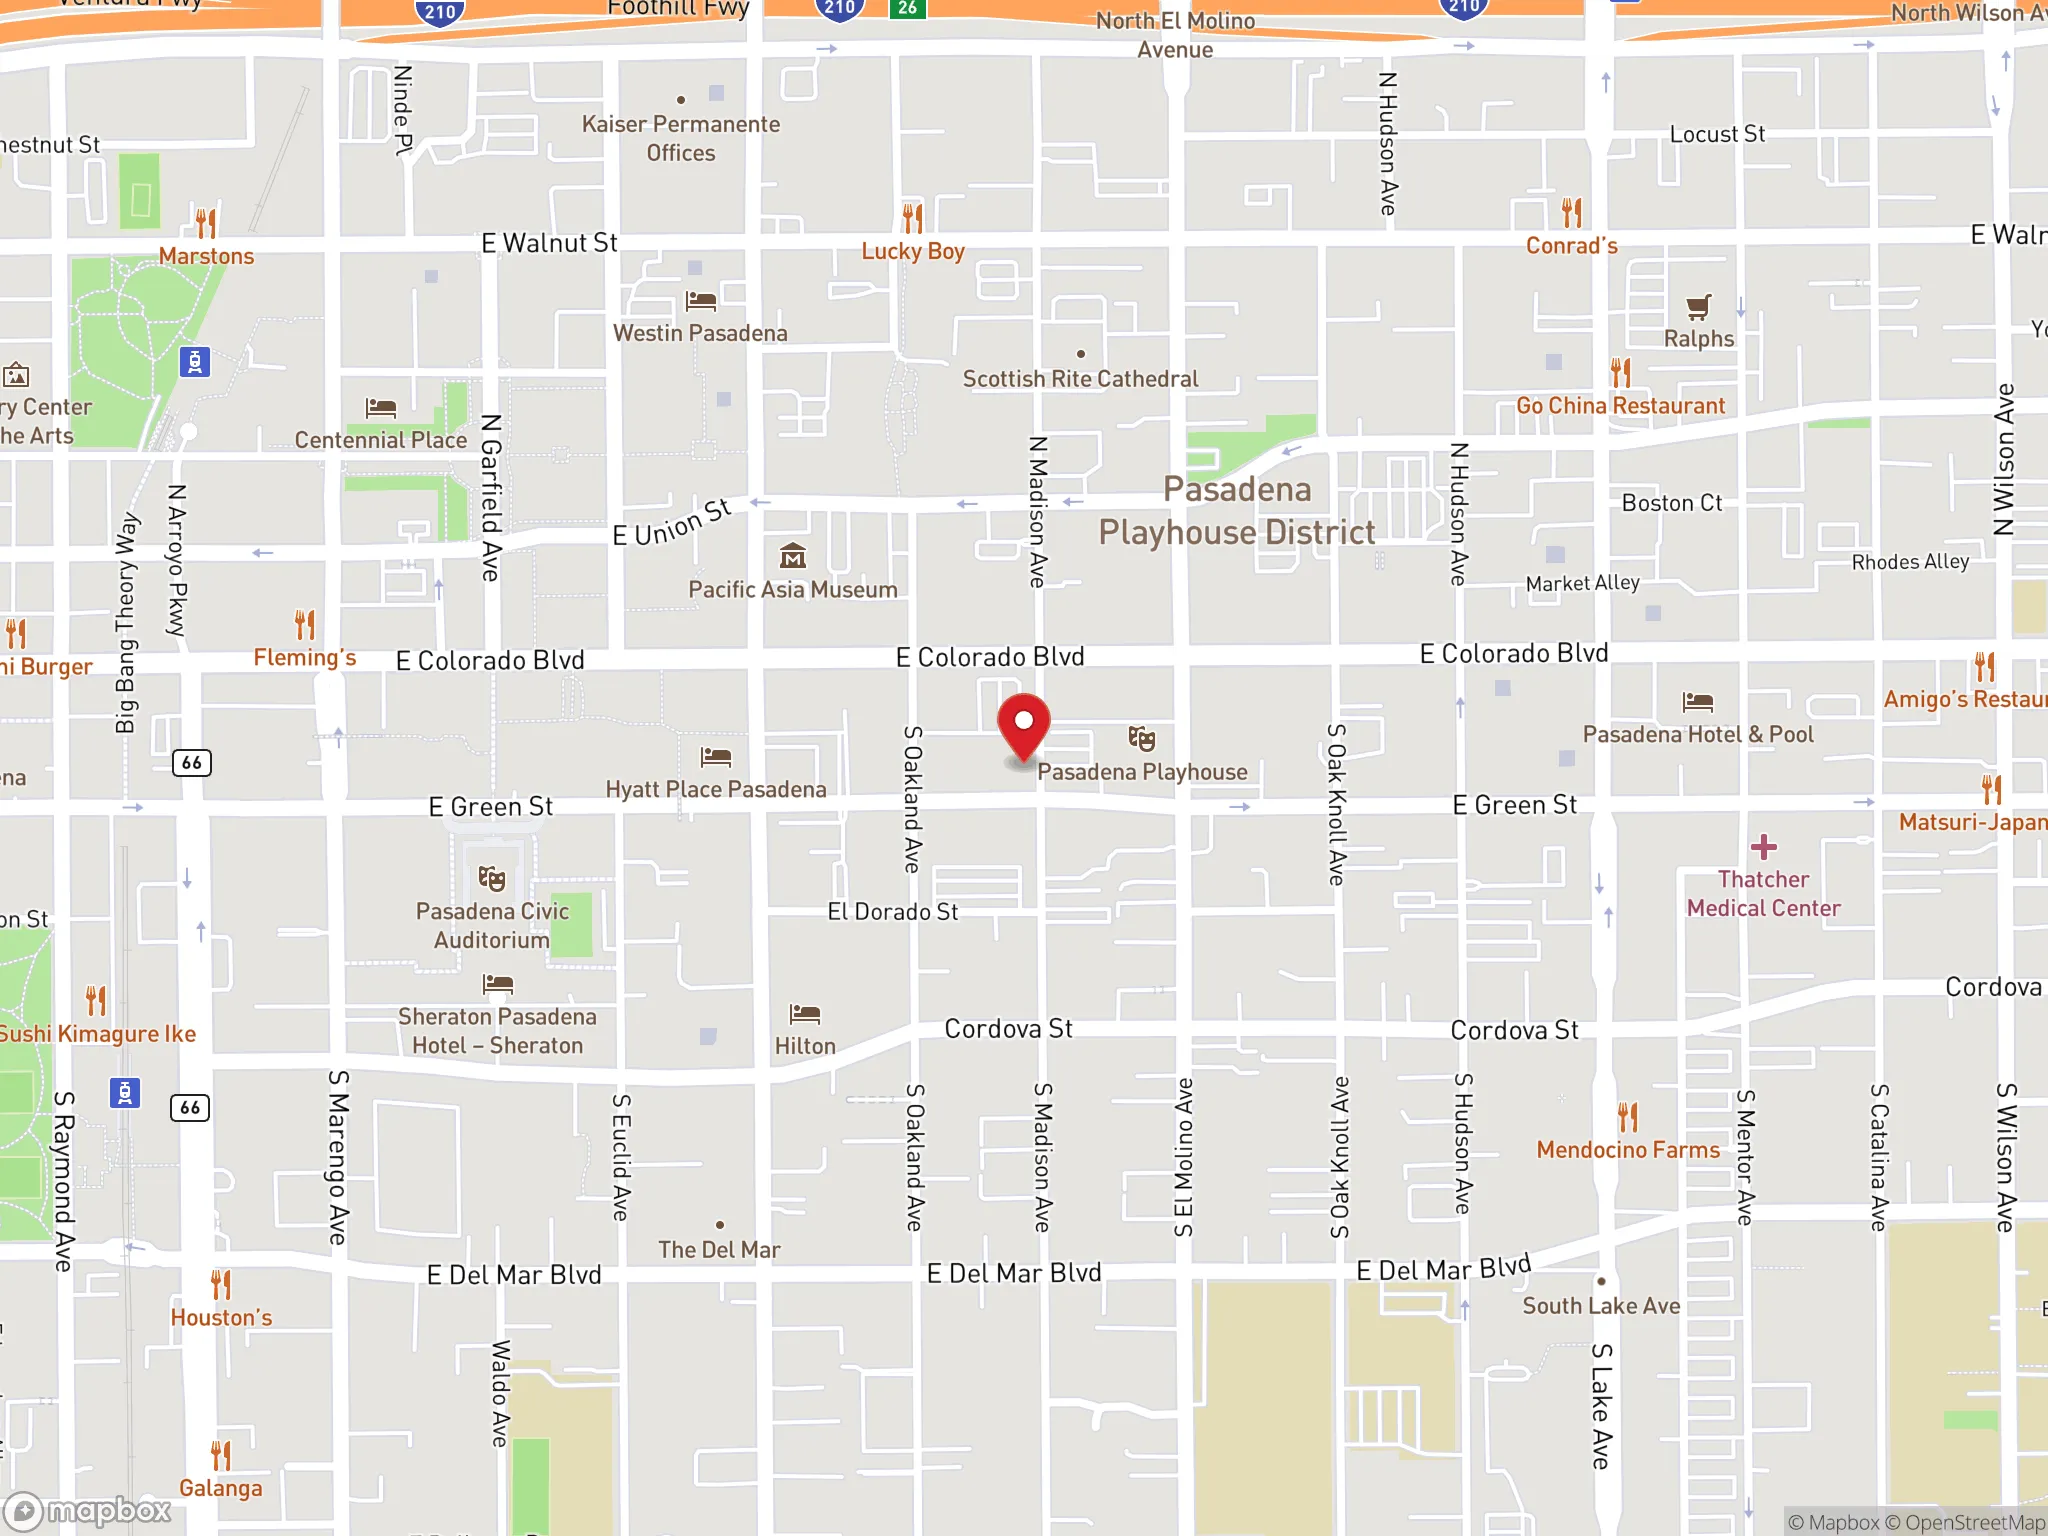 Map showing location of Dave's Hot Chicken restaurant in Pasadena, California.